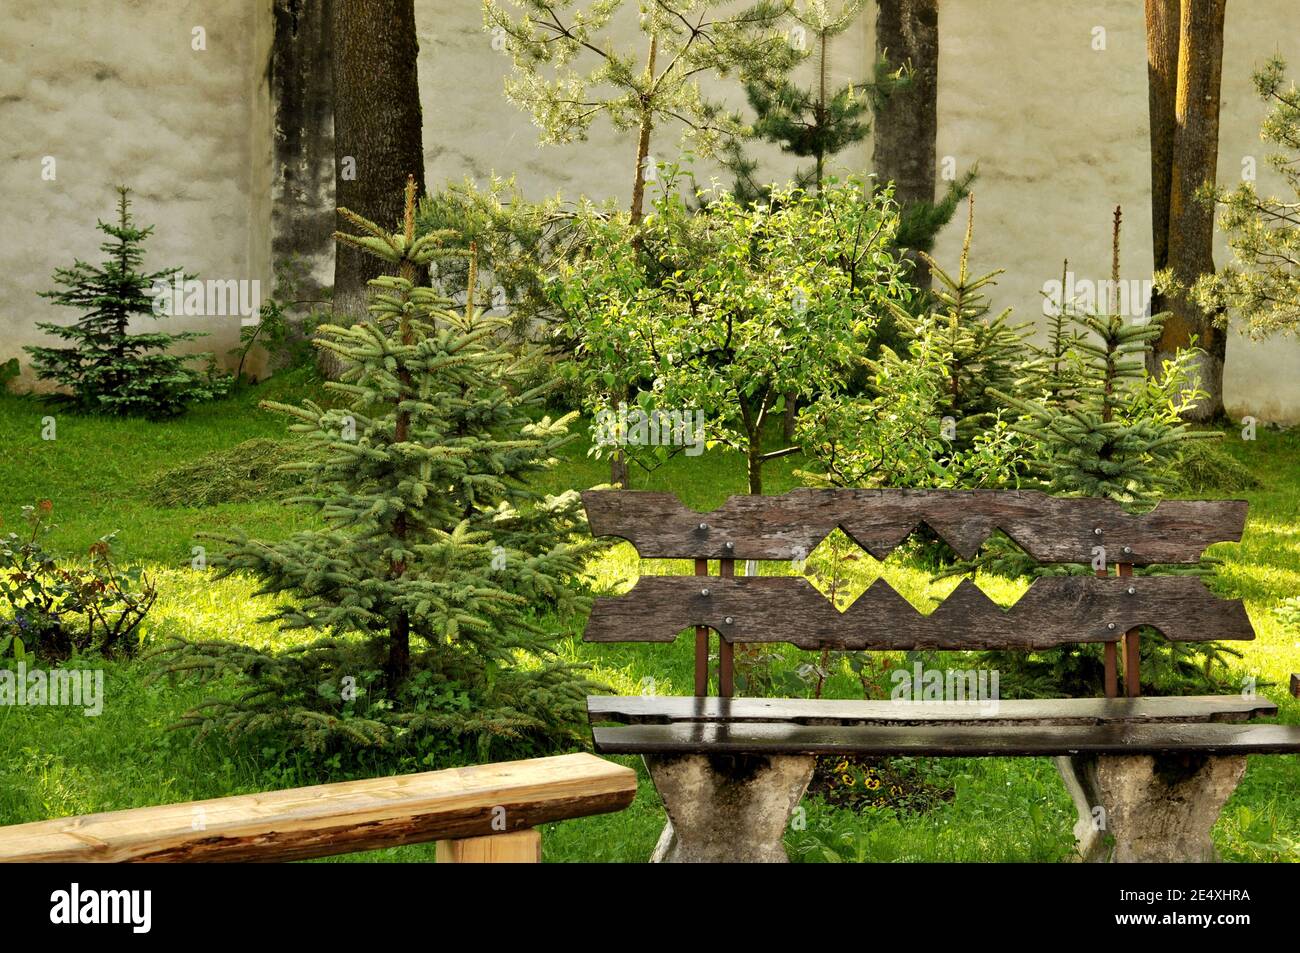 Wooden bench in the garden with pine trees behind. Stock Photo